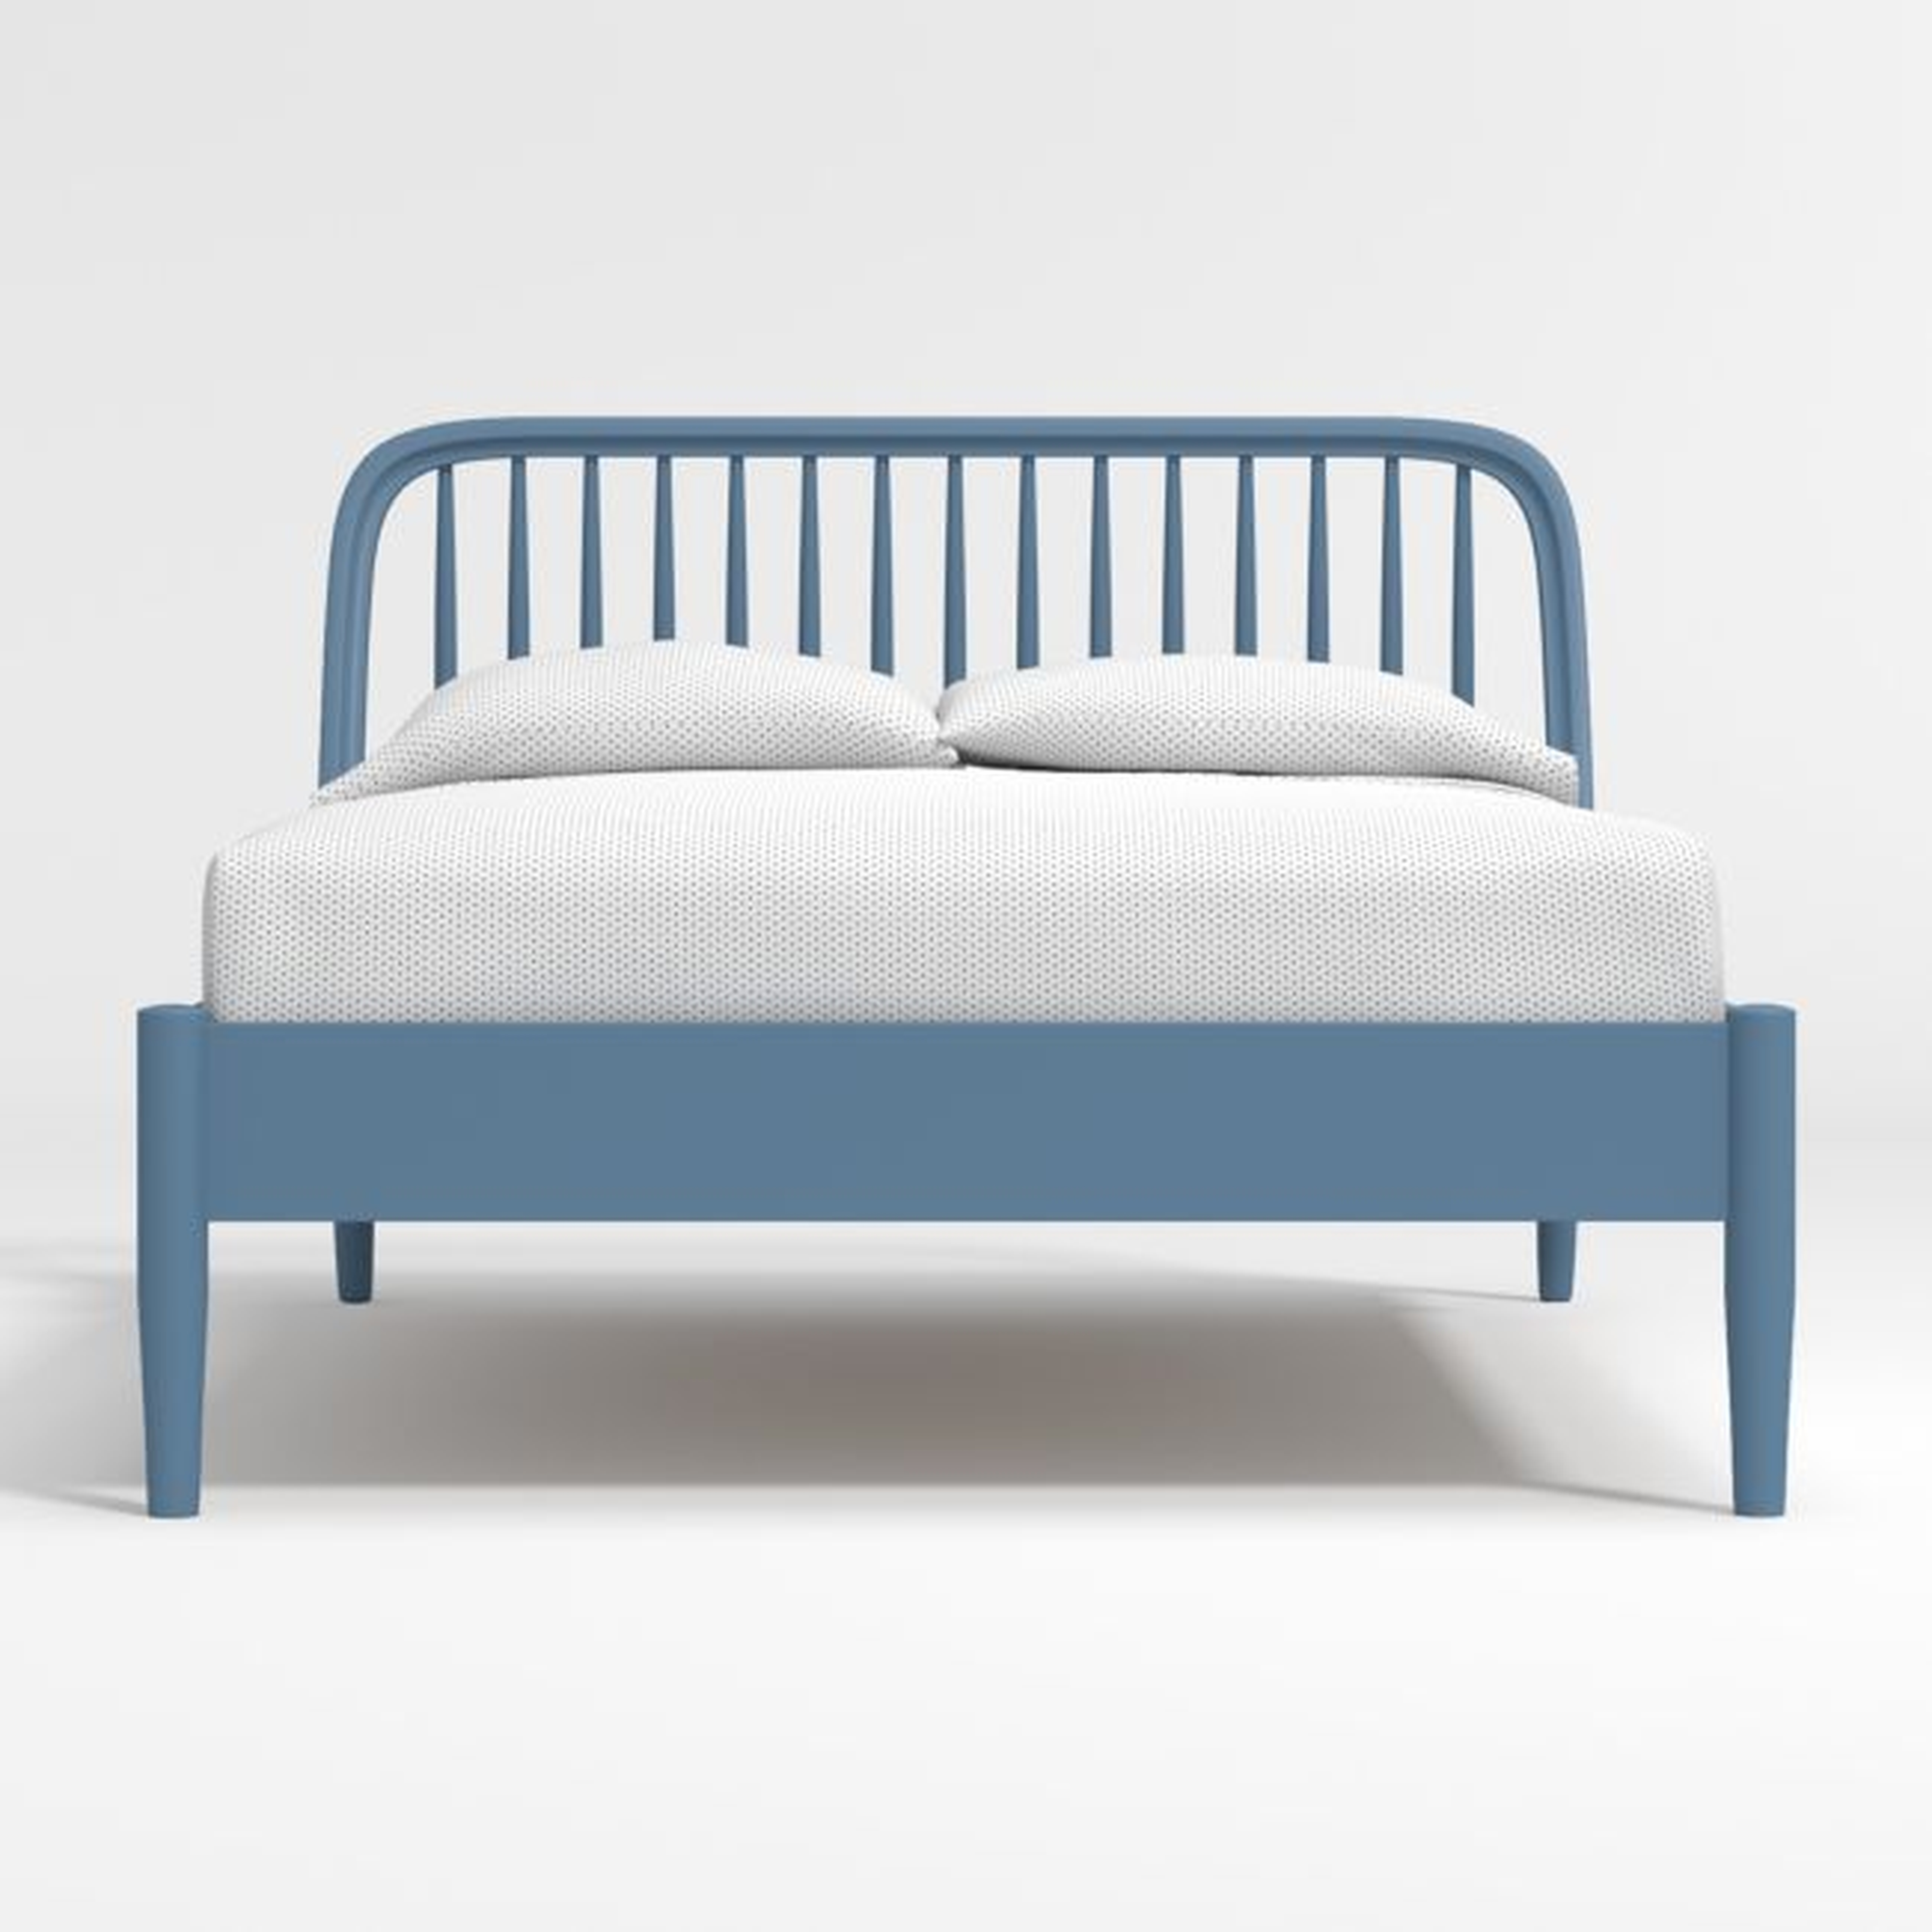 Bodie Blue Spindle Full Bed - Crate and Barrel